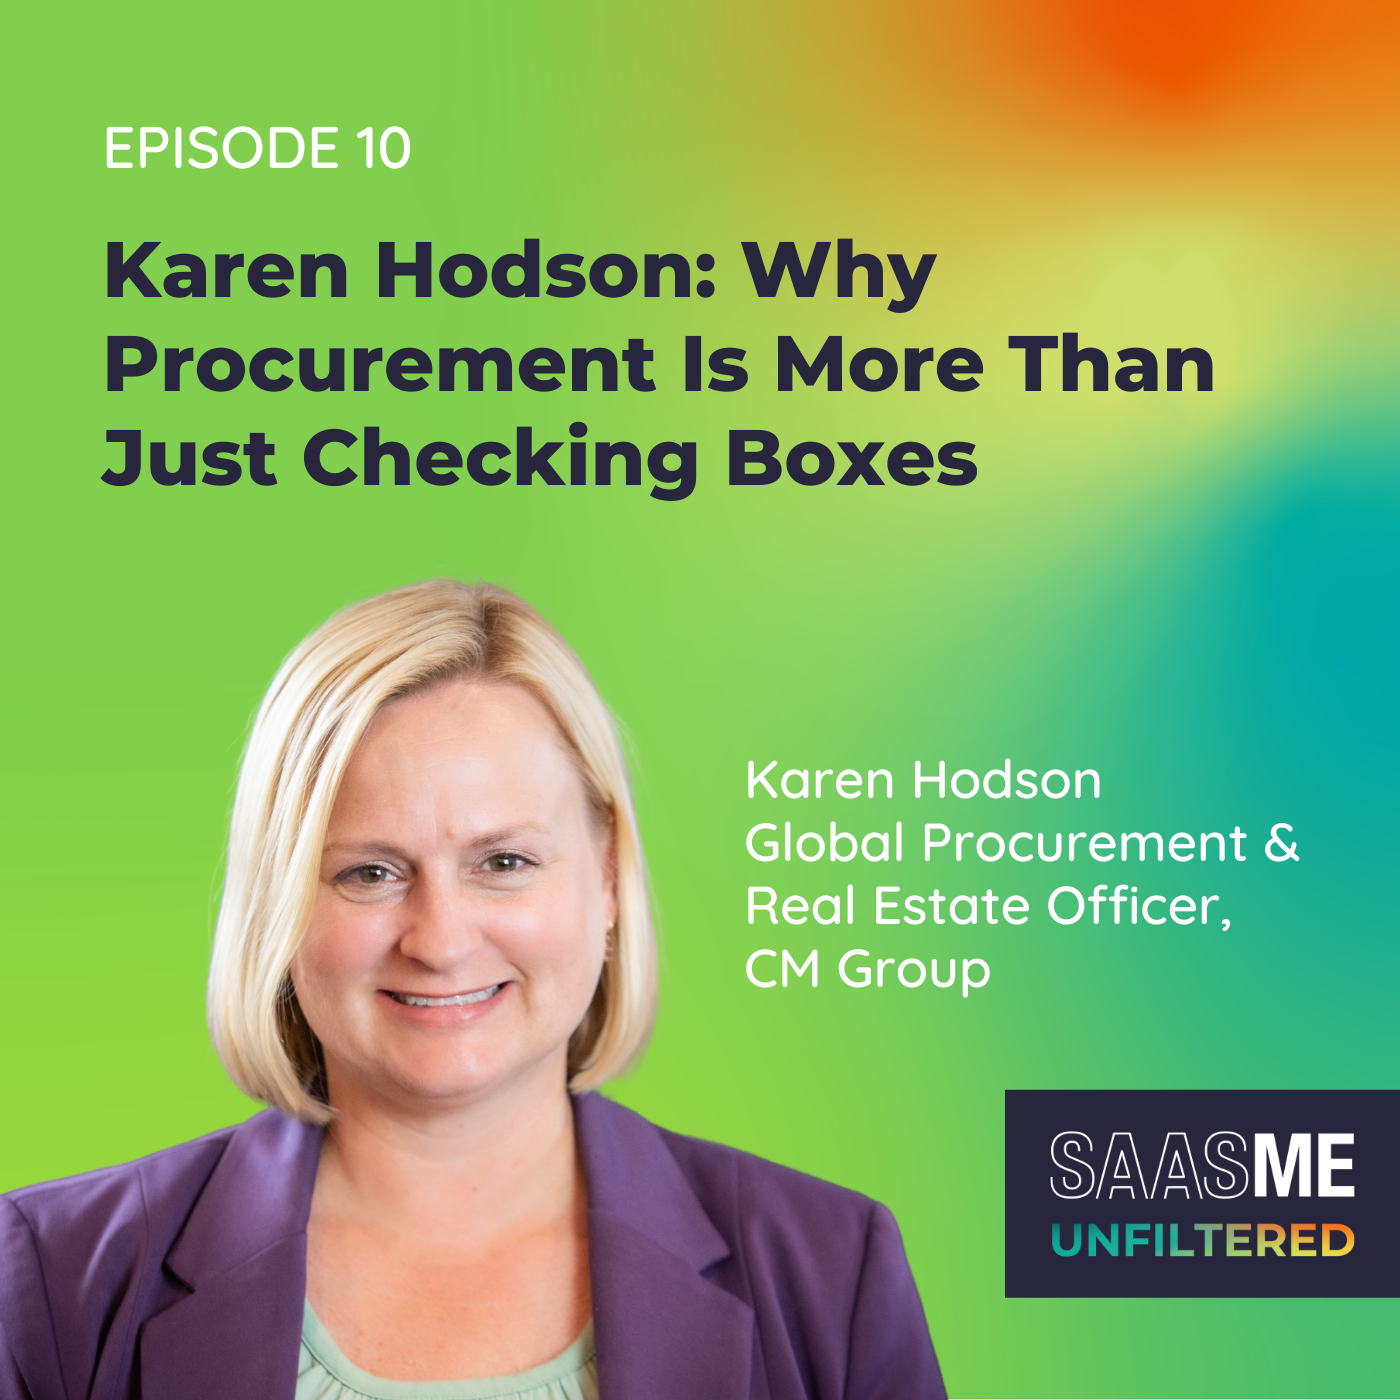 Karen Hodson: Why Procurement Is More Than Just Checking Boxes